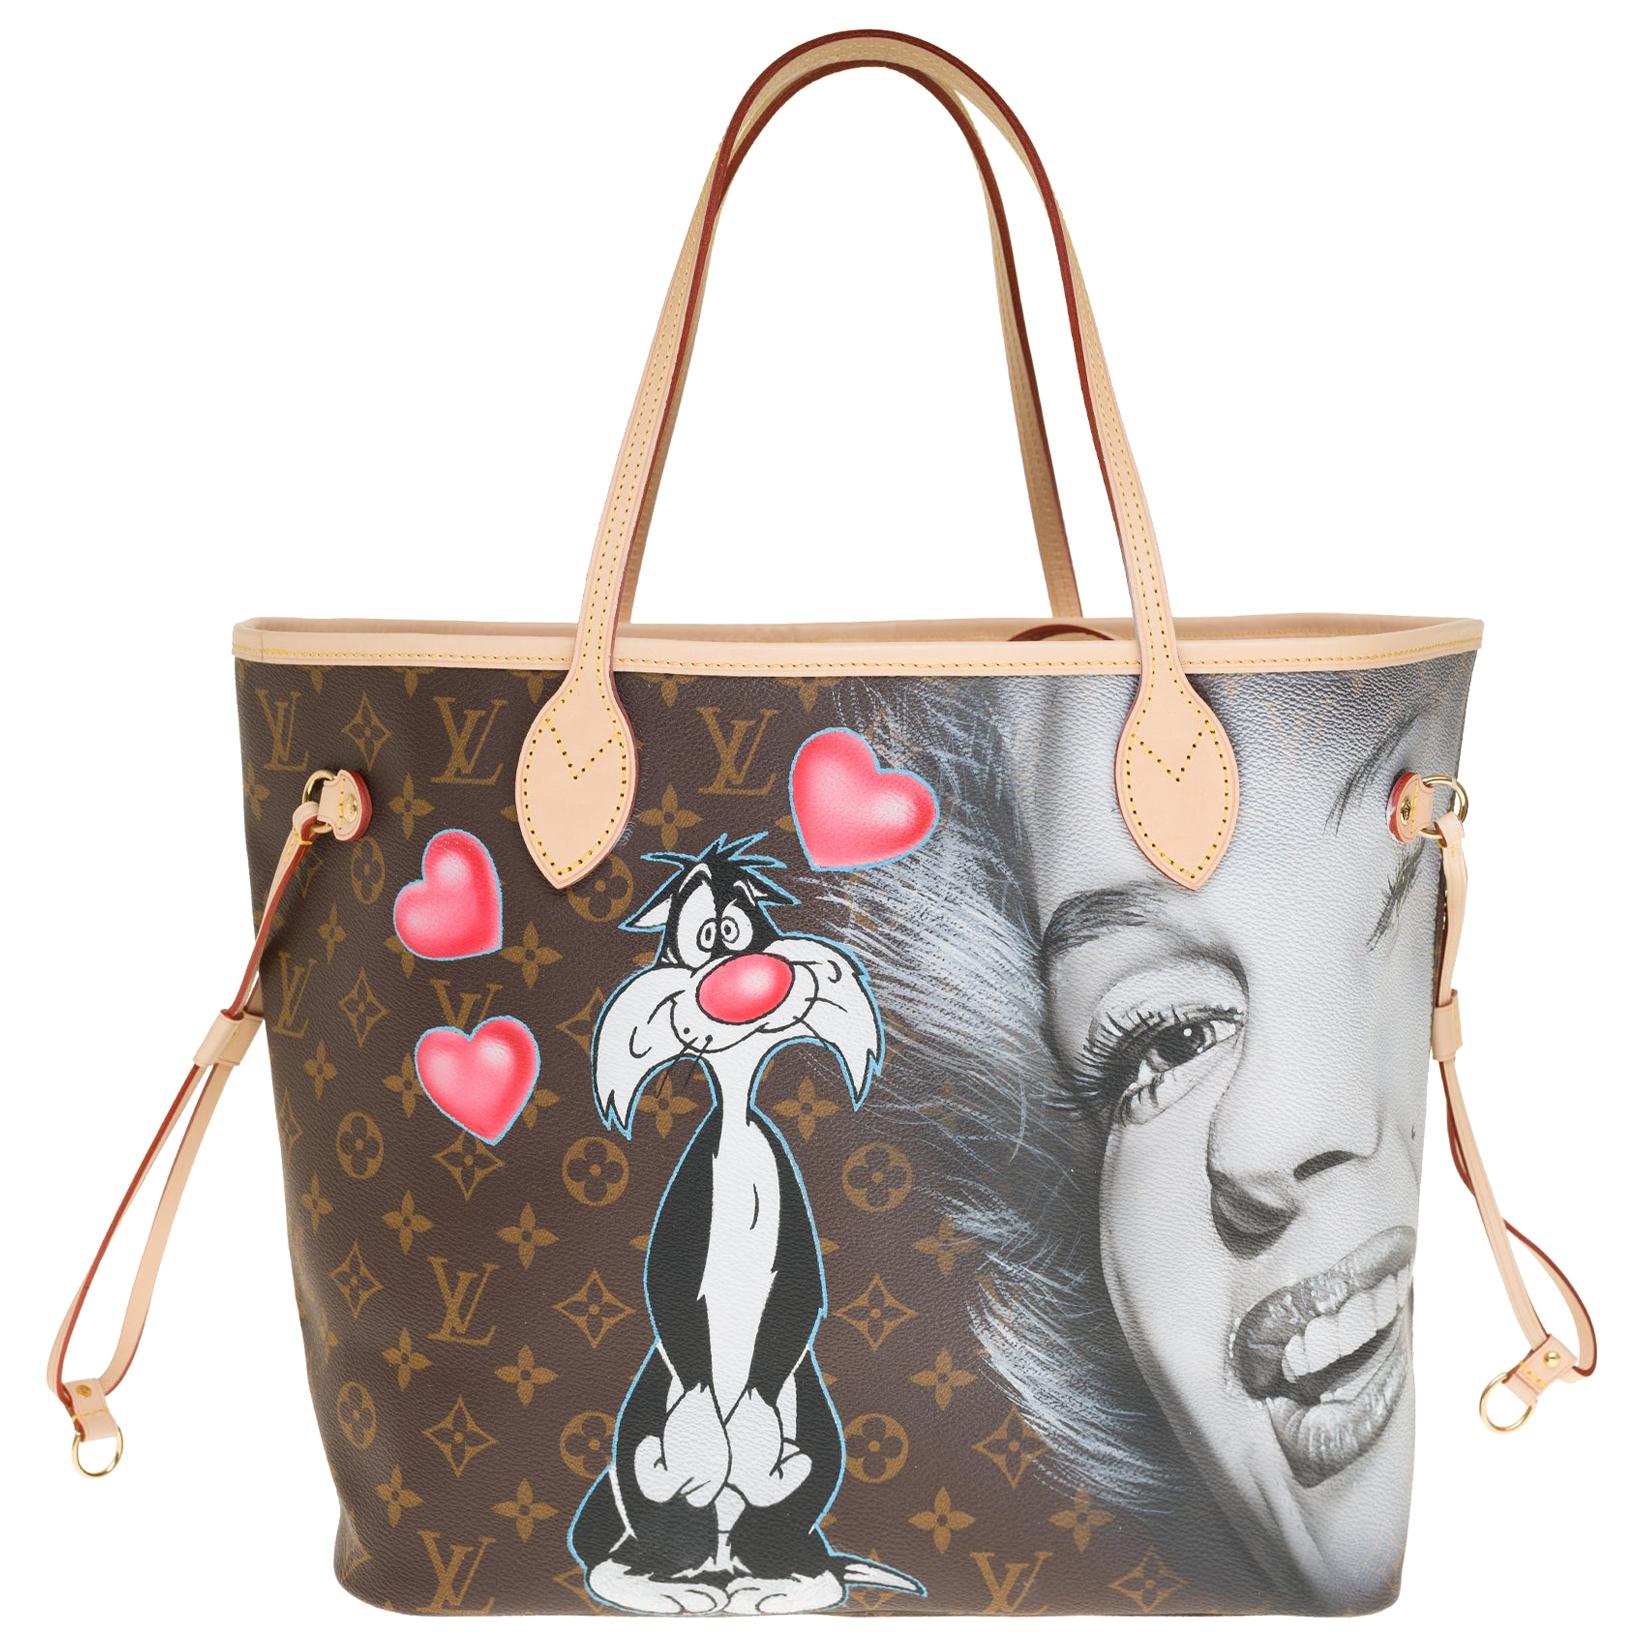 Neverfull MM handbag in Monogram canvas customized "In Love with Marilyn"